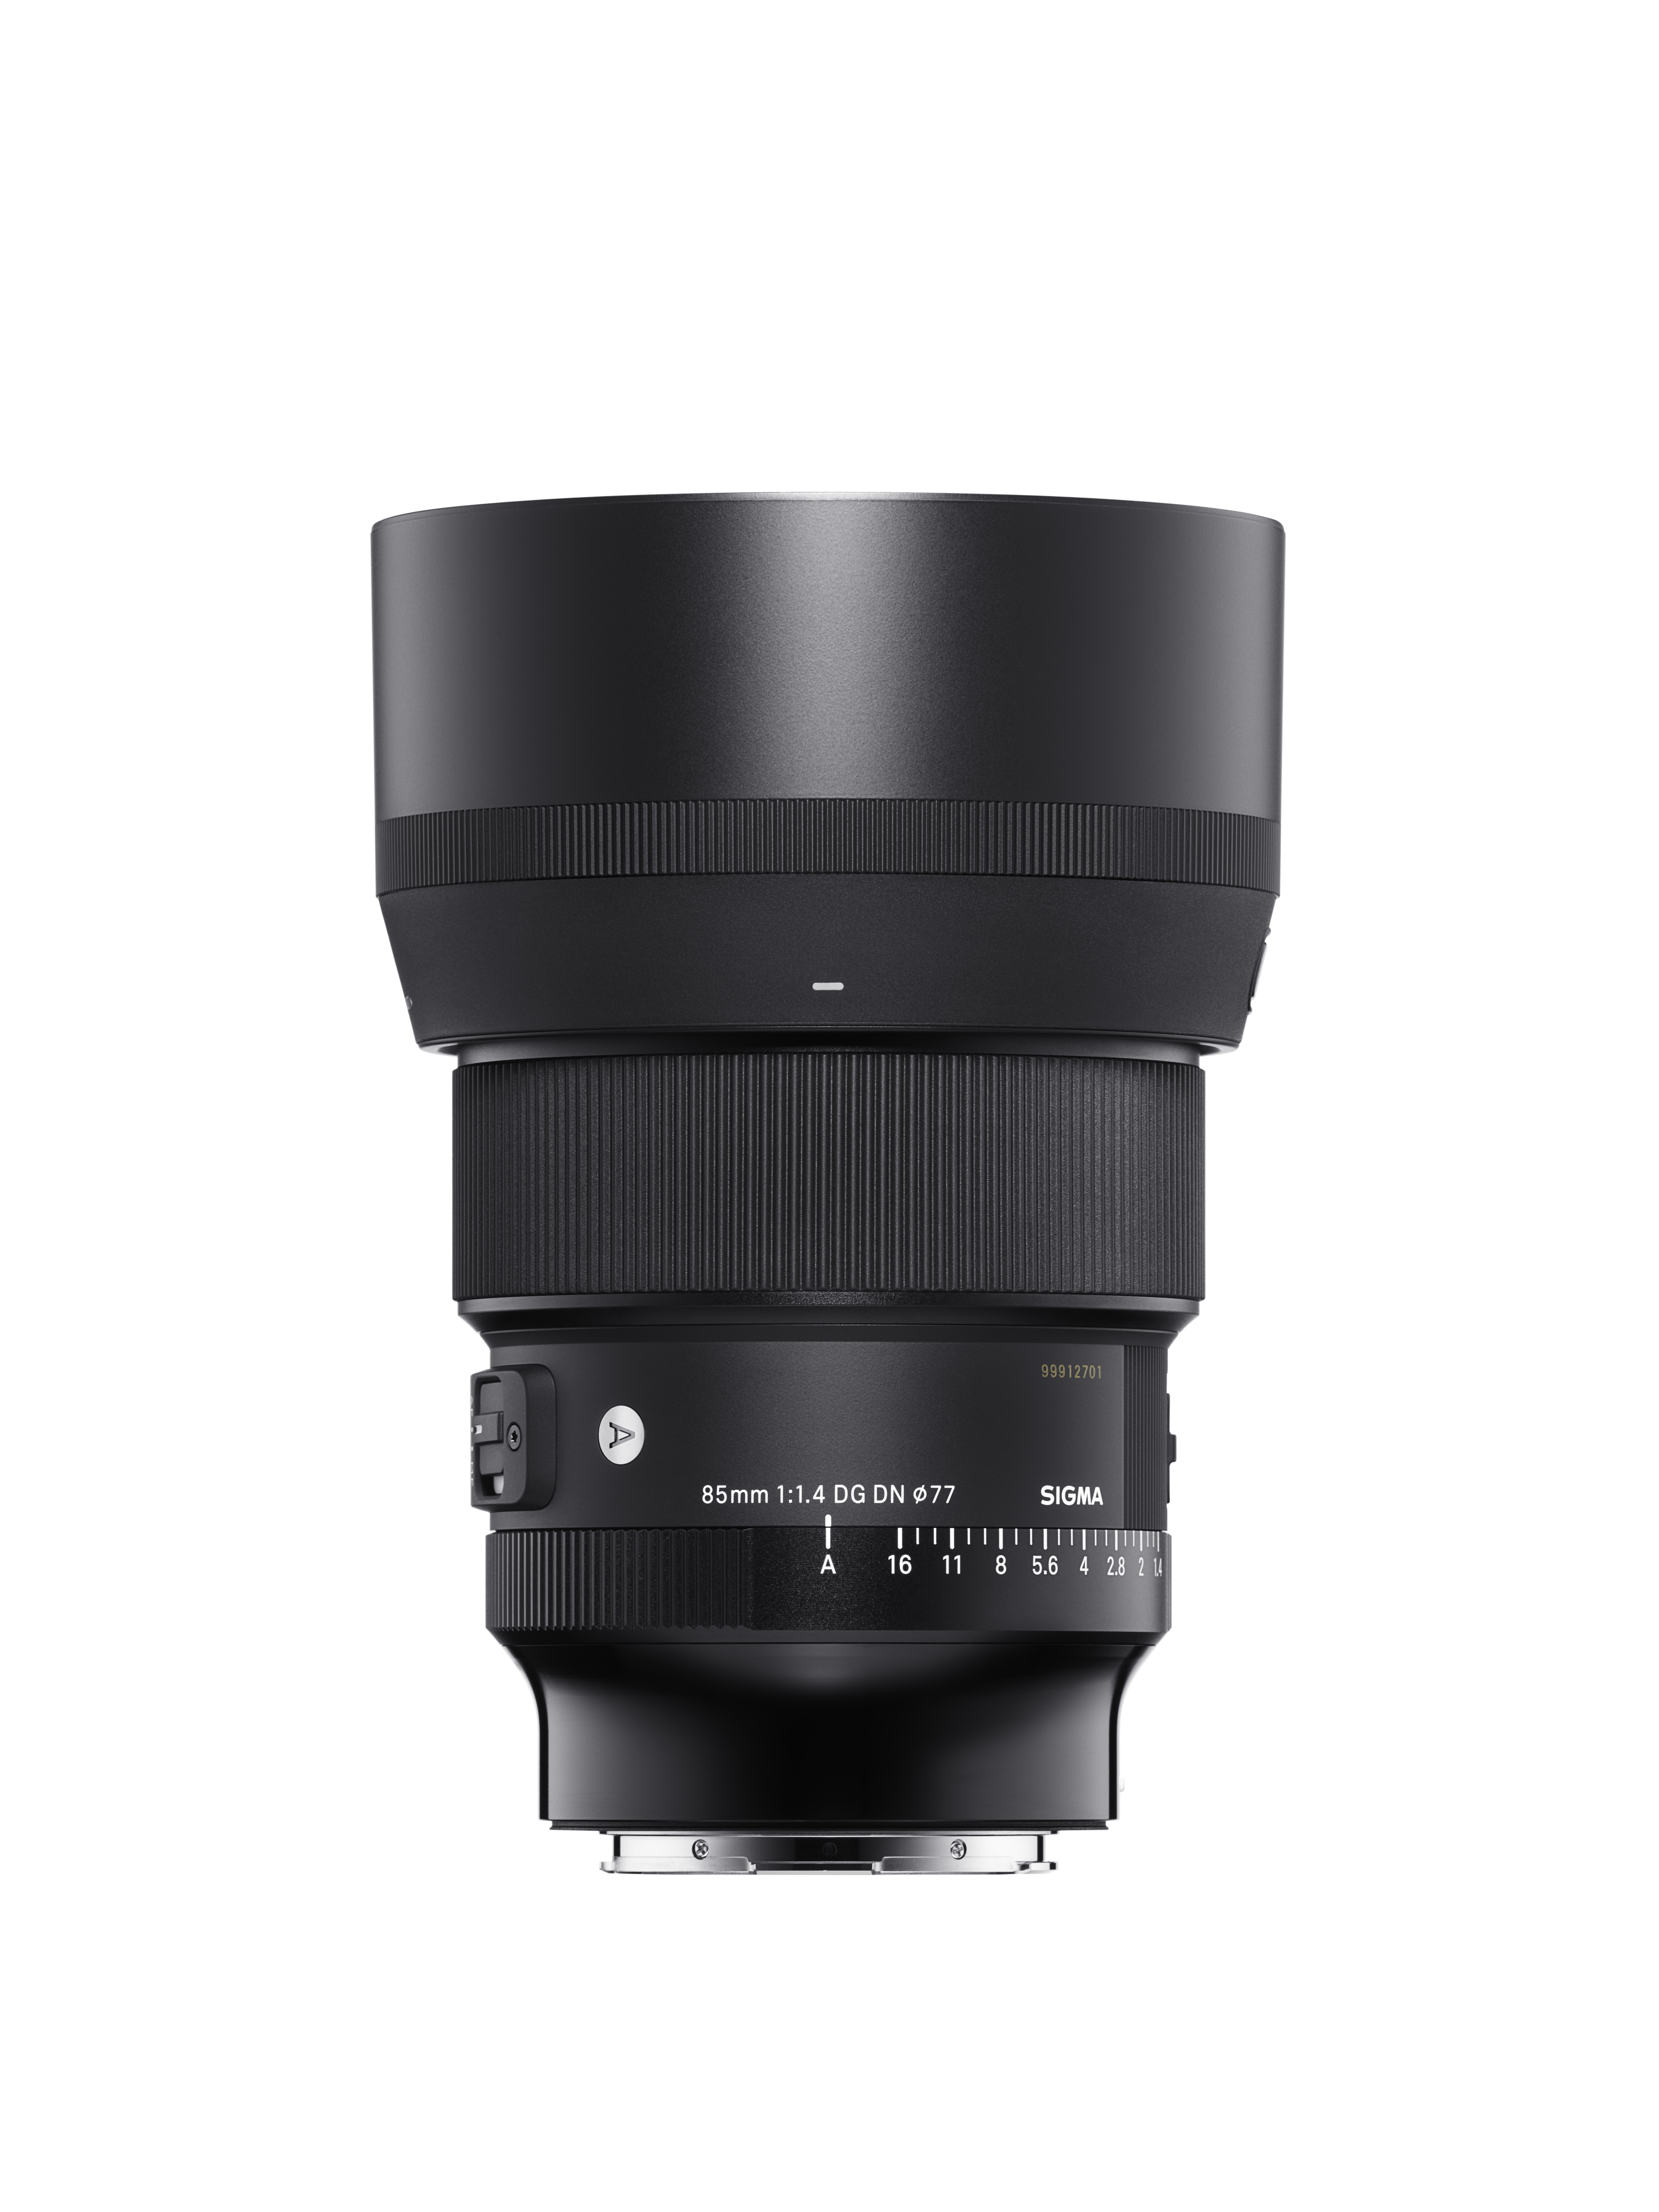 The Sigma 85mm f1.4 DG DN Art Solves an Issue with Aperture Rings